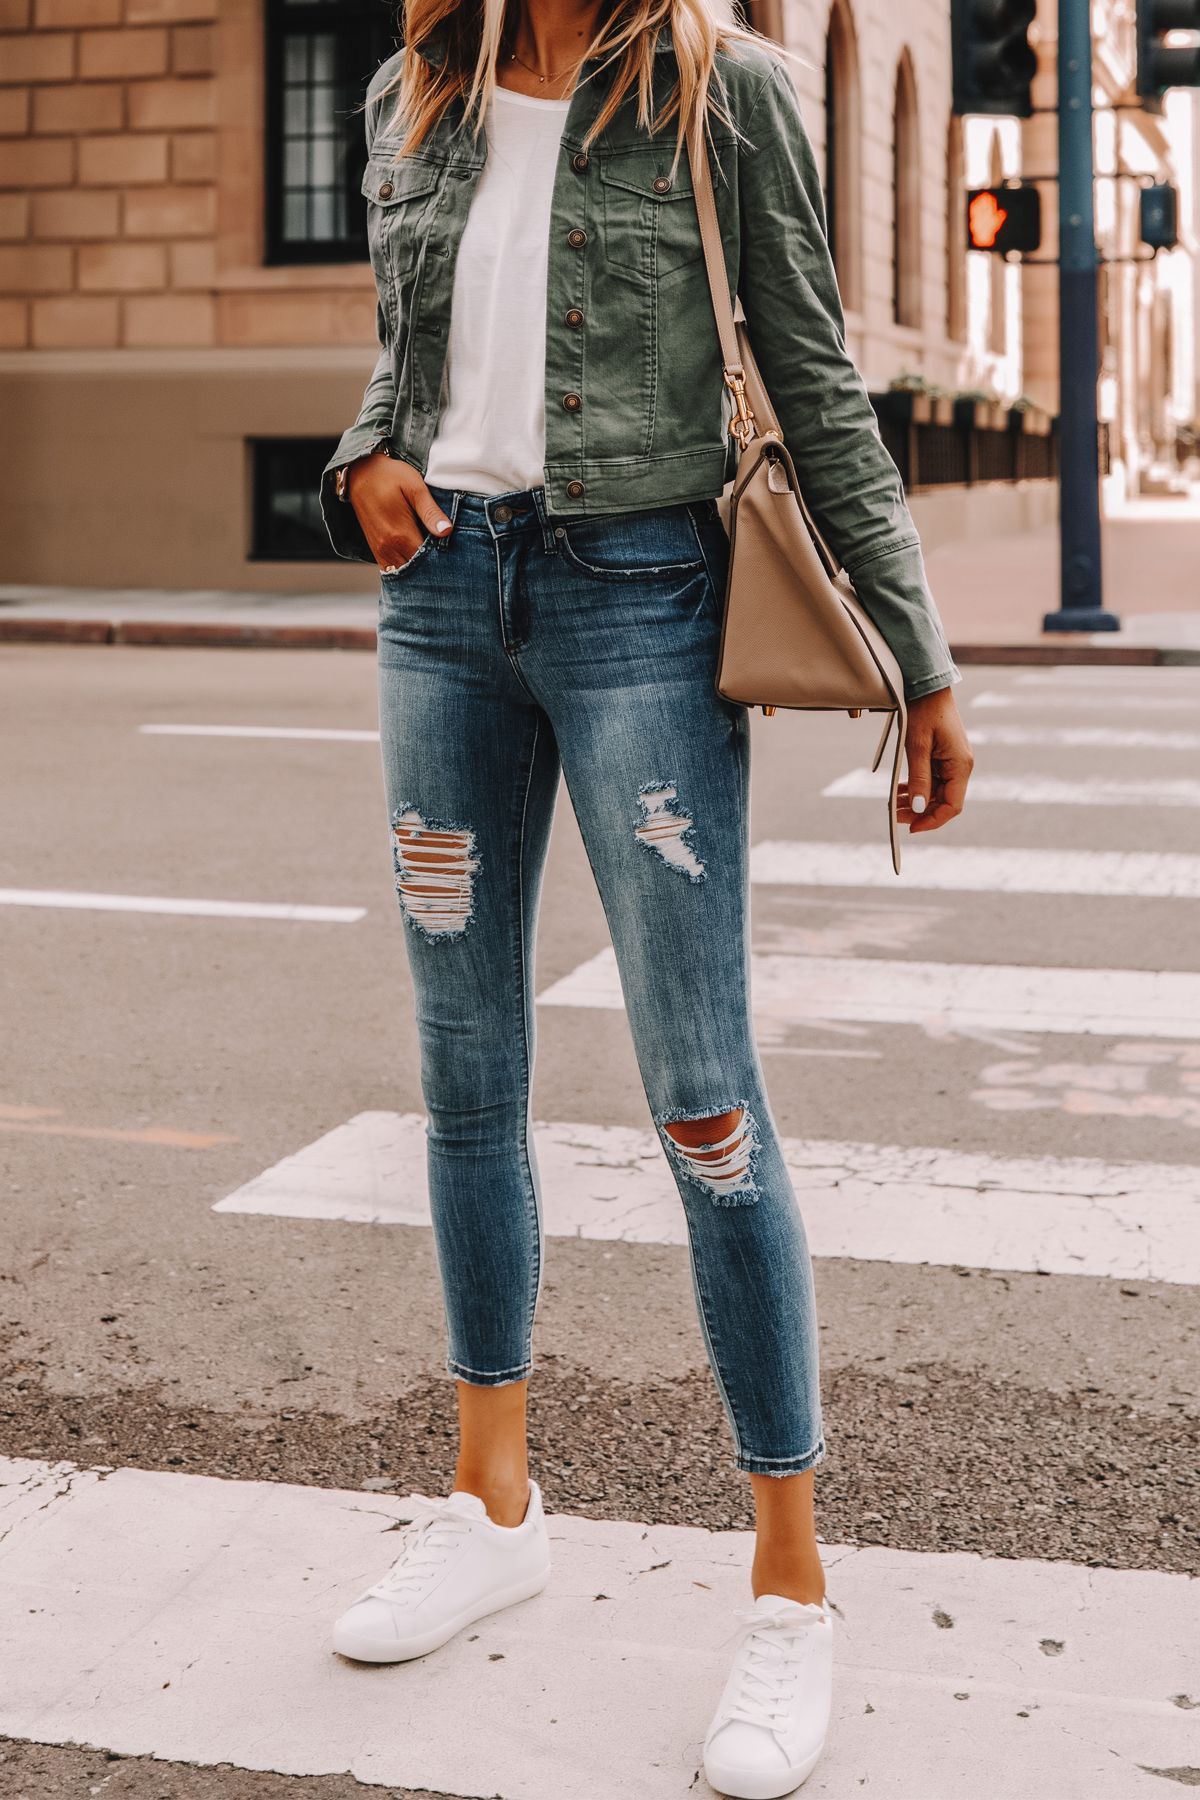 Two Affordable Walmart Outfits for Spring | Fashion Jackson -   15 style Jeans ripped ideas